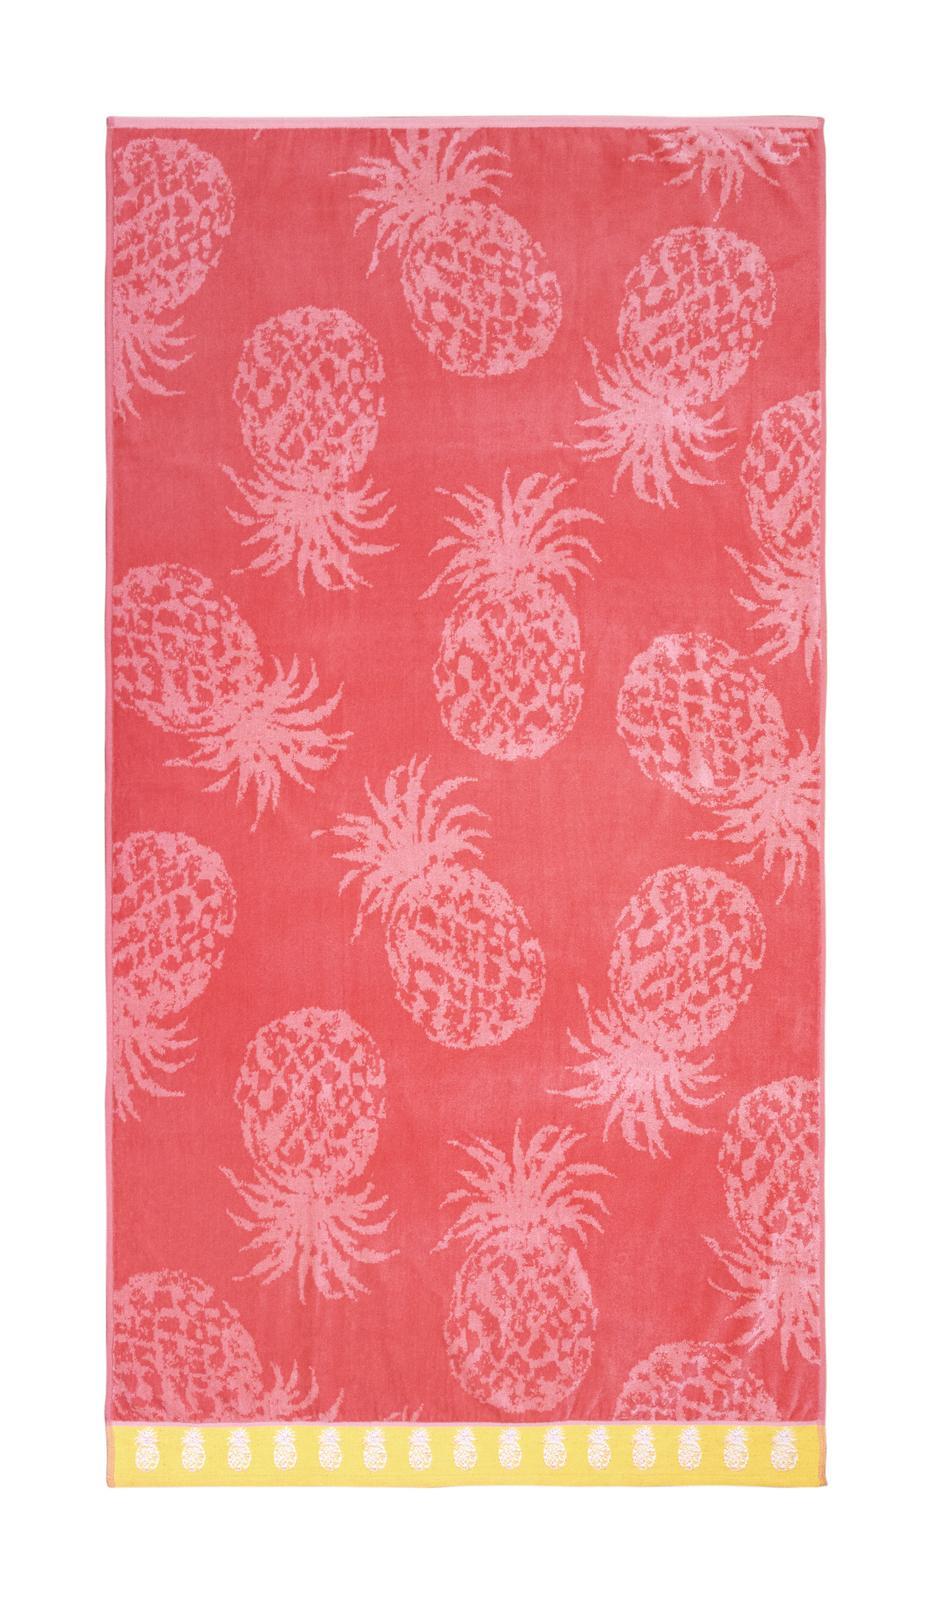 Tommy Bahama Pineapple Passion 91x173cm Cotton Beach Towel Absorbent Coral/Peach